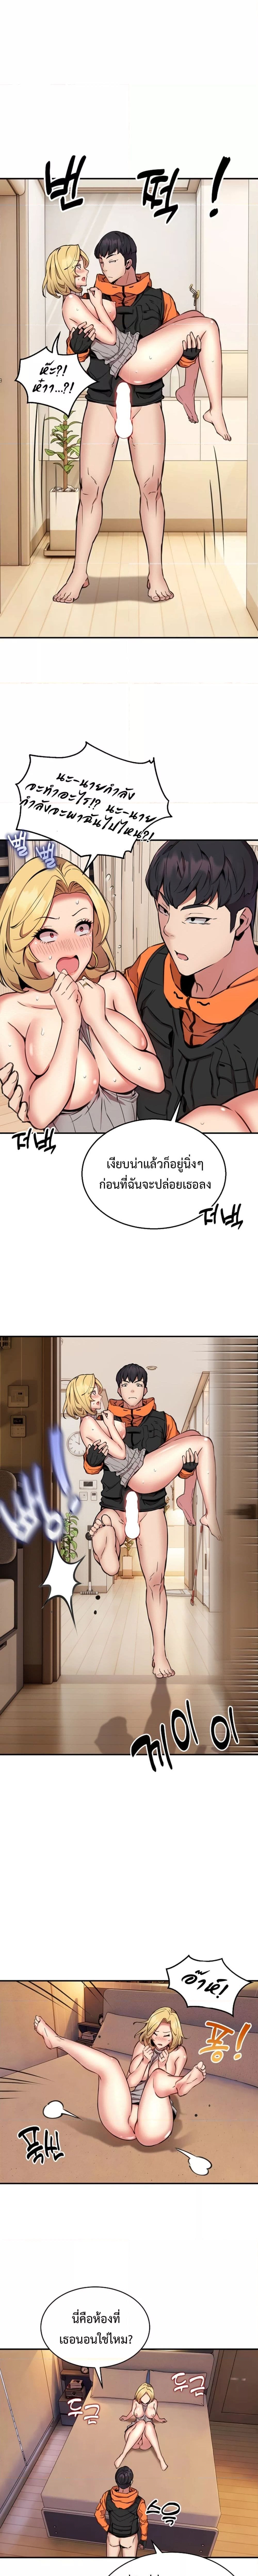 Driver in the New City ตอนที่ 9 ภาพ 12